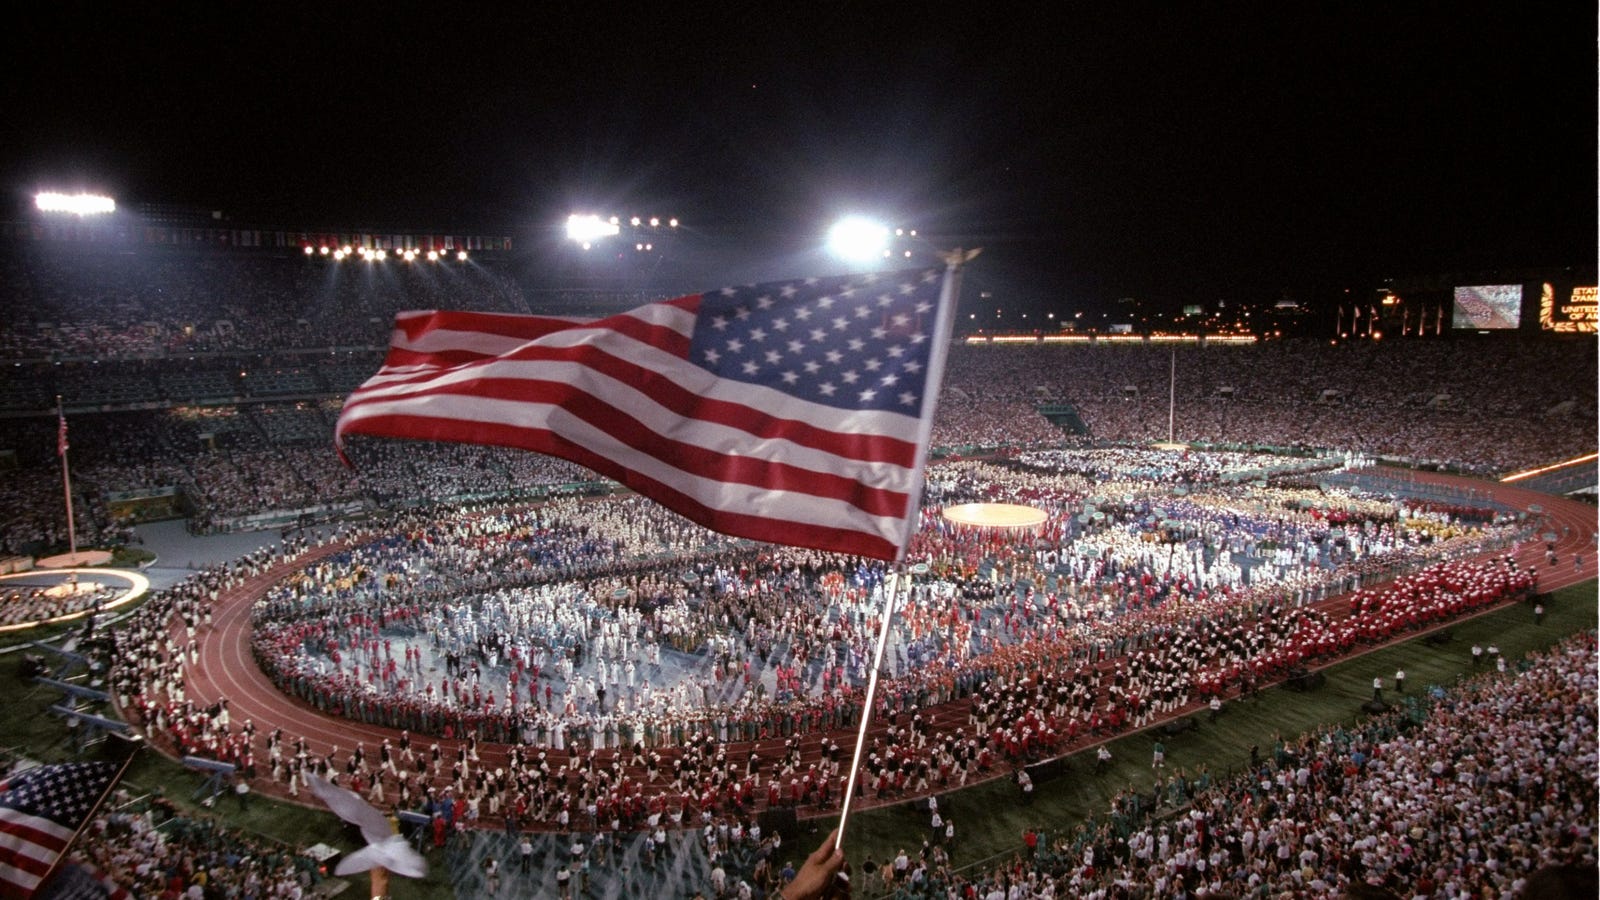 U.S. Olympic Committee Selects Boston To Bid For The 2024 Olympics